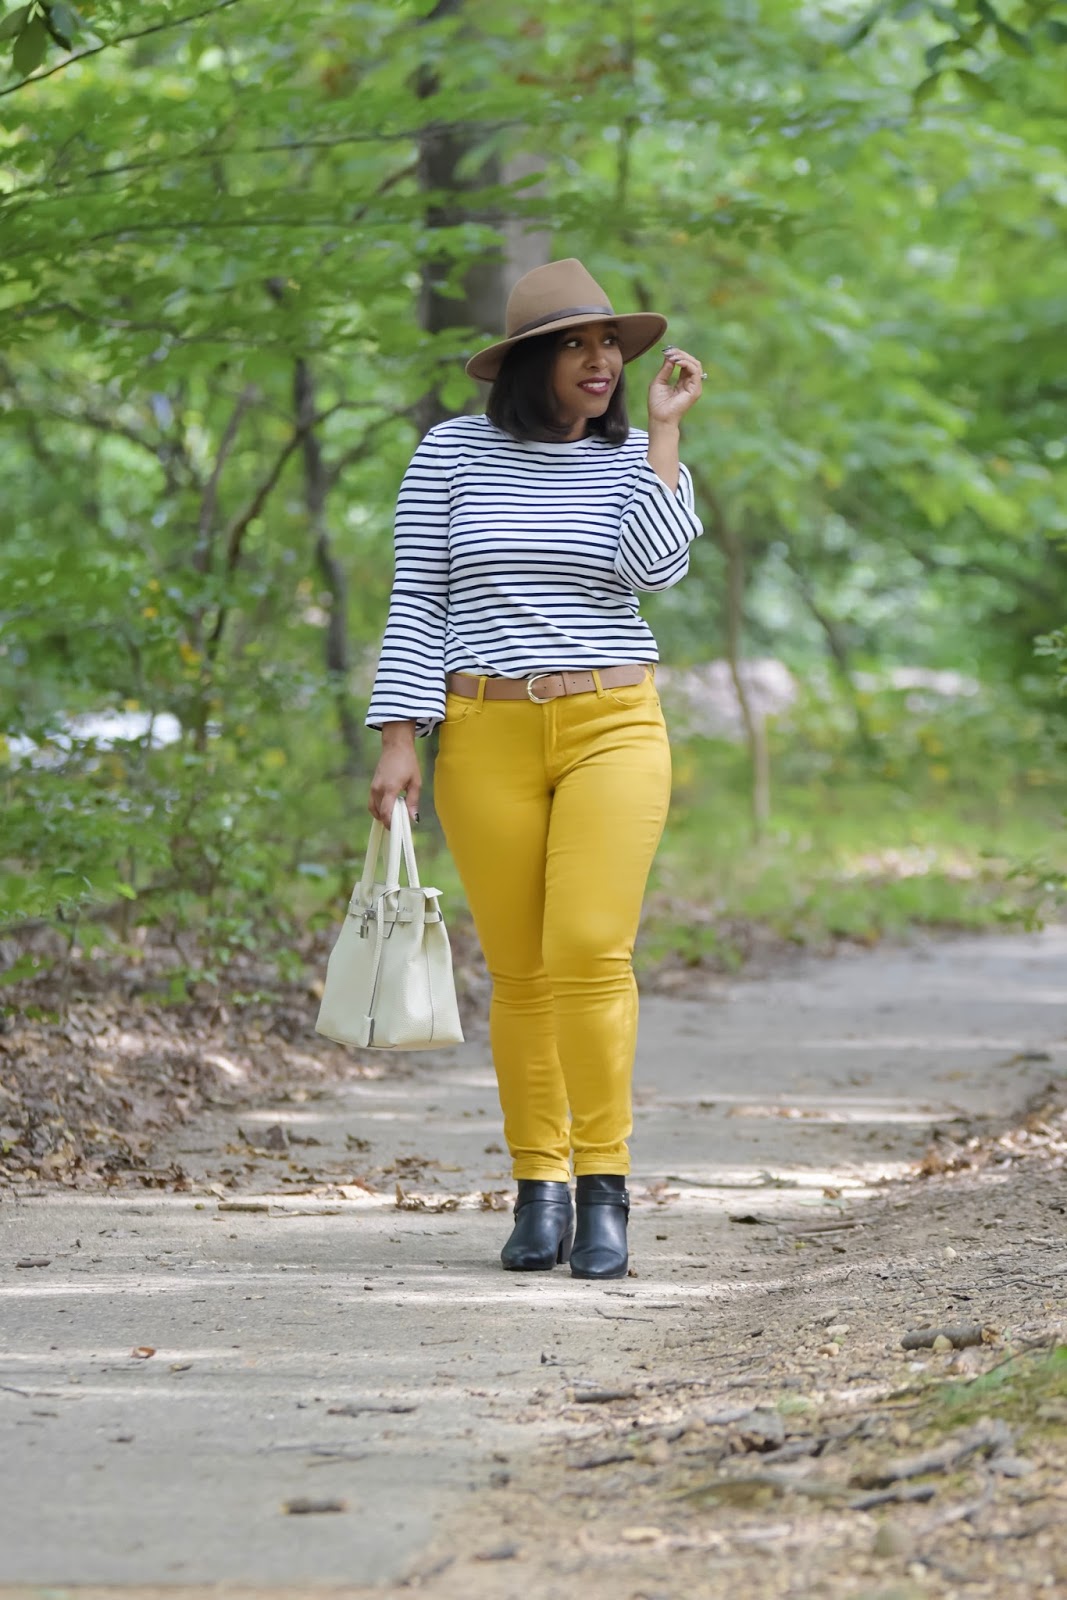 Old Navy Style, Say Hi, stripe top, colored denim, fall outfit looks, wide brim hats, black booties for fall, fall outfit ideas, colored denim